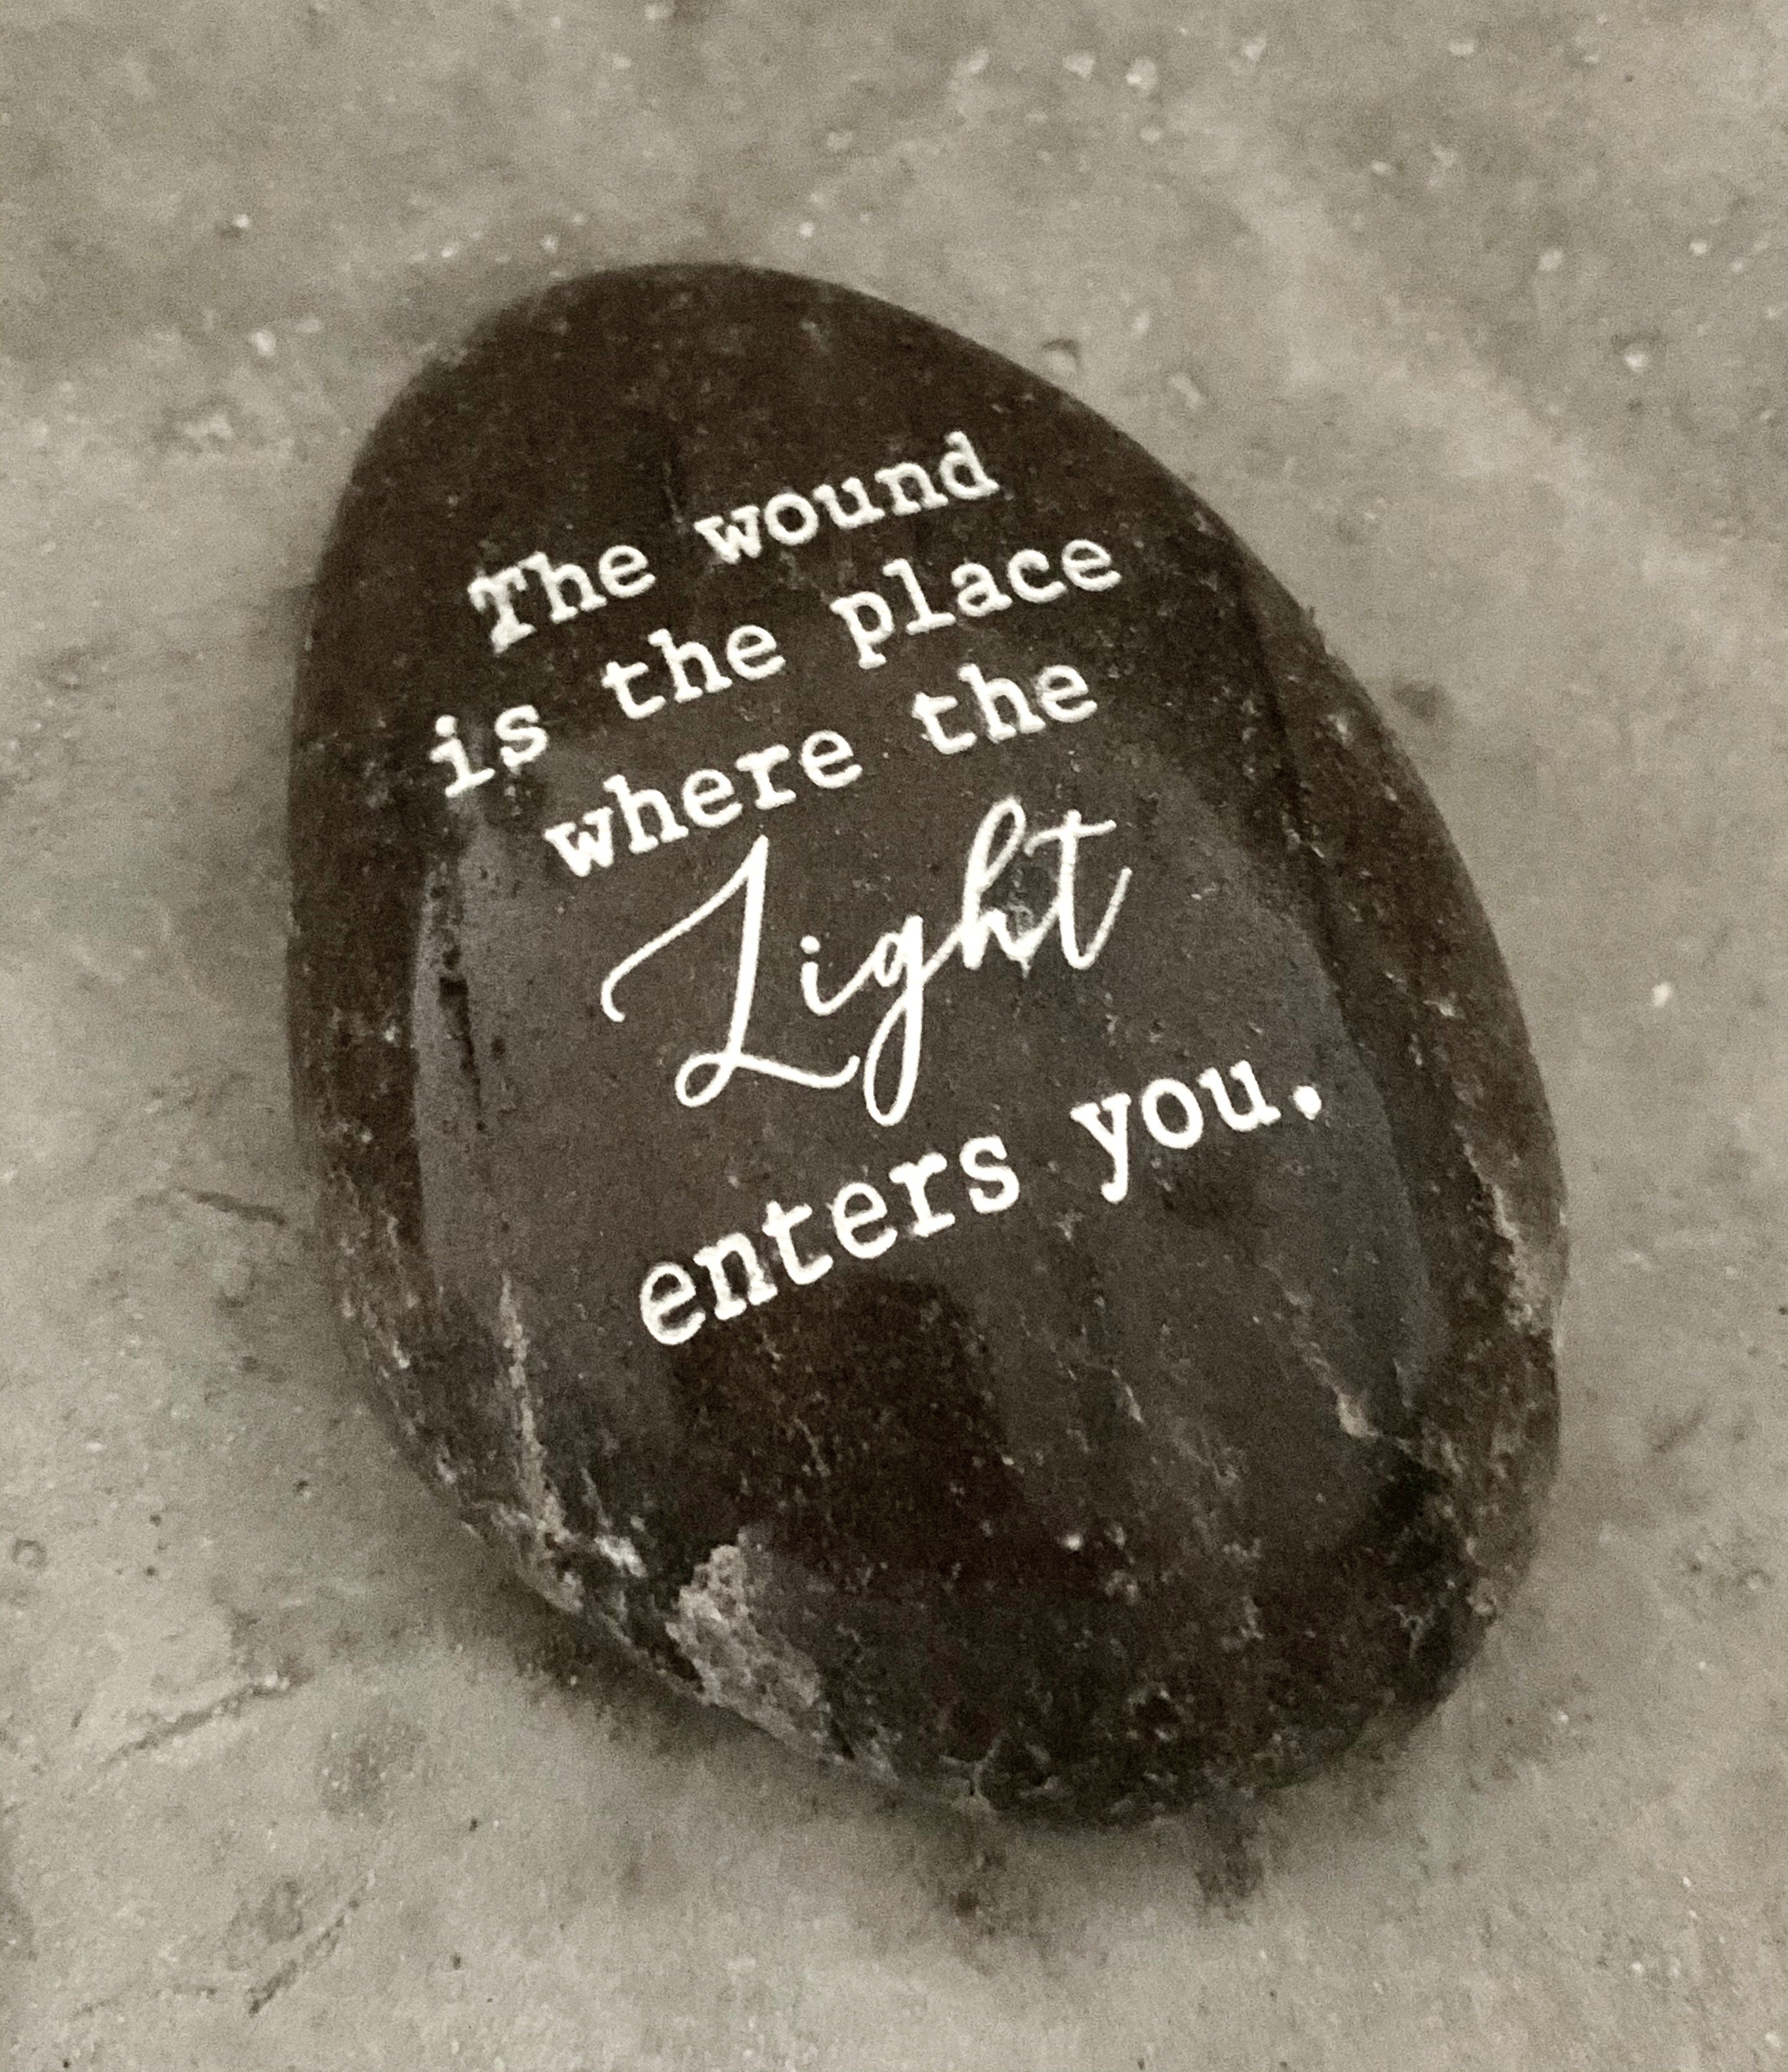 The Wound is the Place Where the Light Enters You ~ Engraved Inspirational Rock